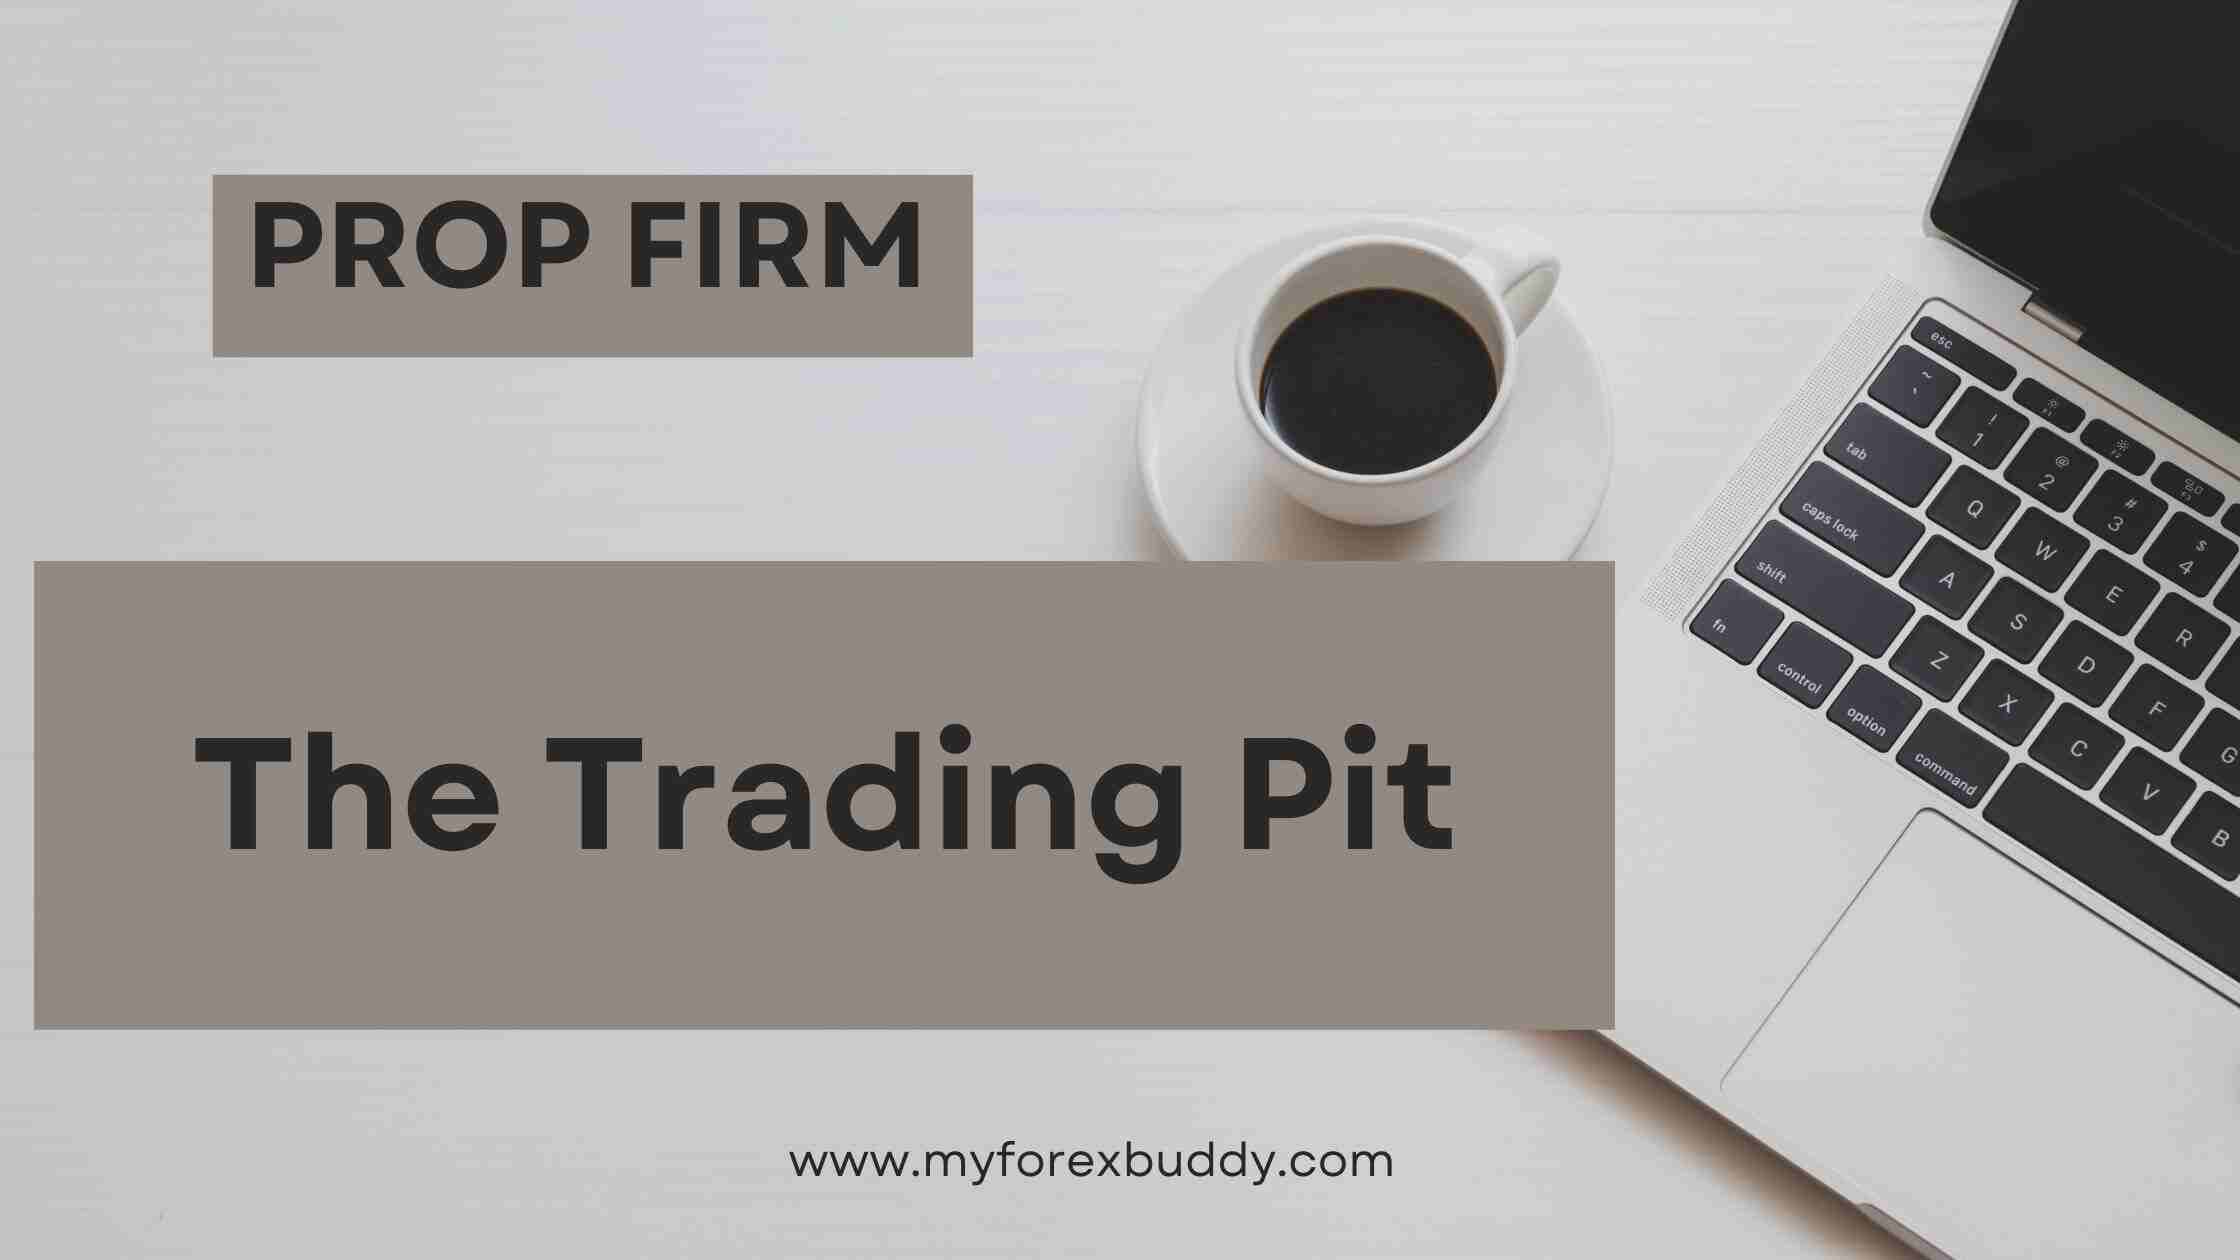 The Trading Pit Review: Prop Firm for Futures, Stocks, CFD and Forex